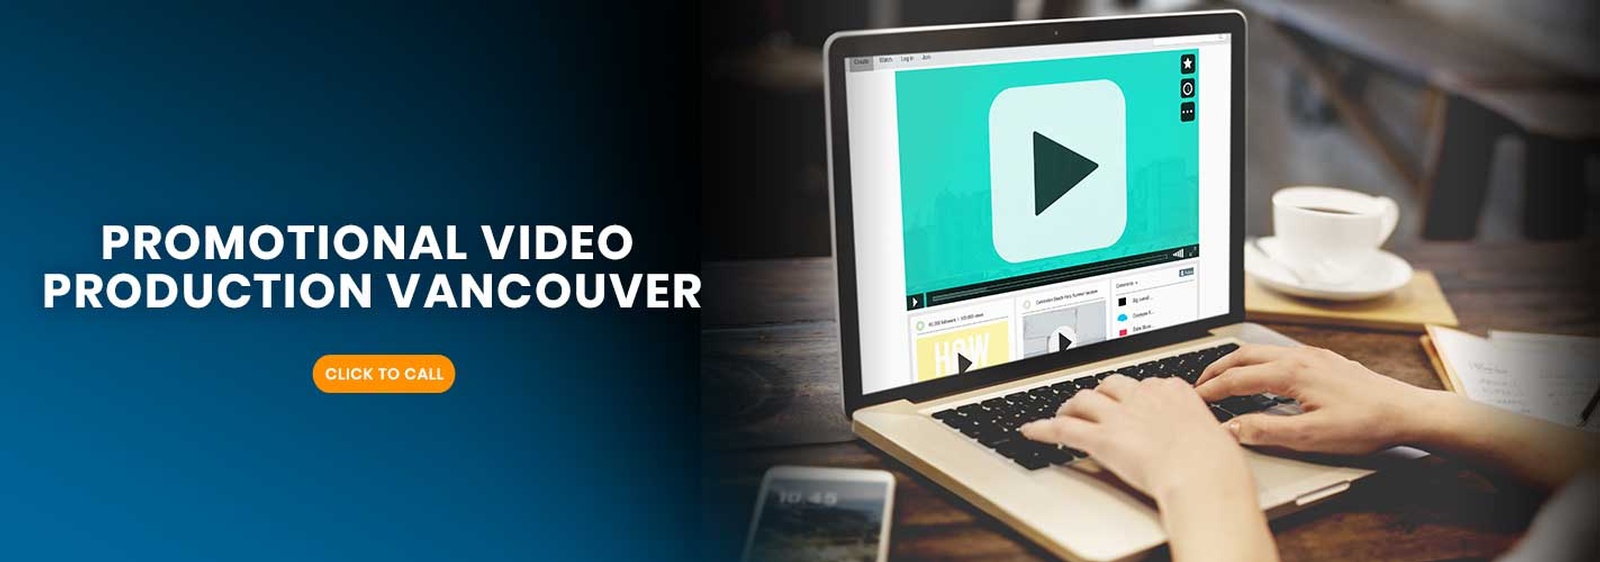 Promotional Video Production Vancouver